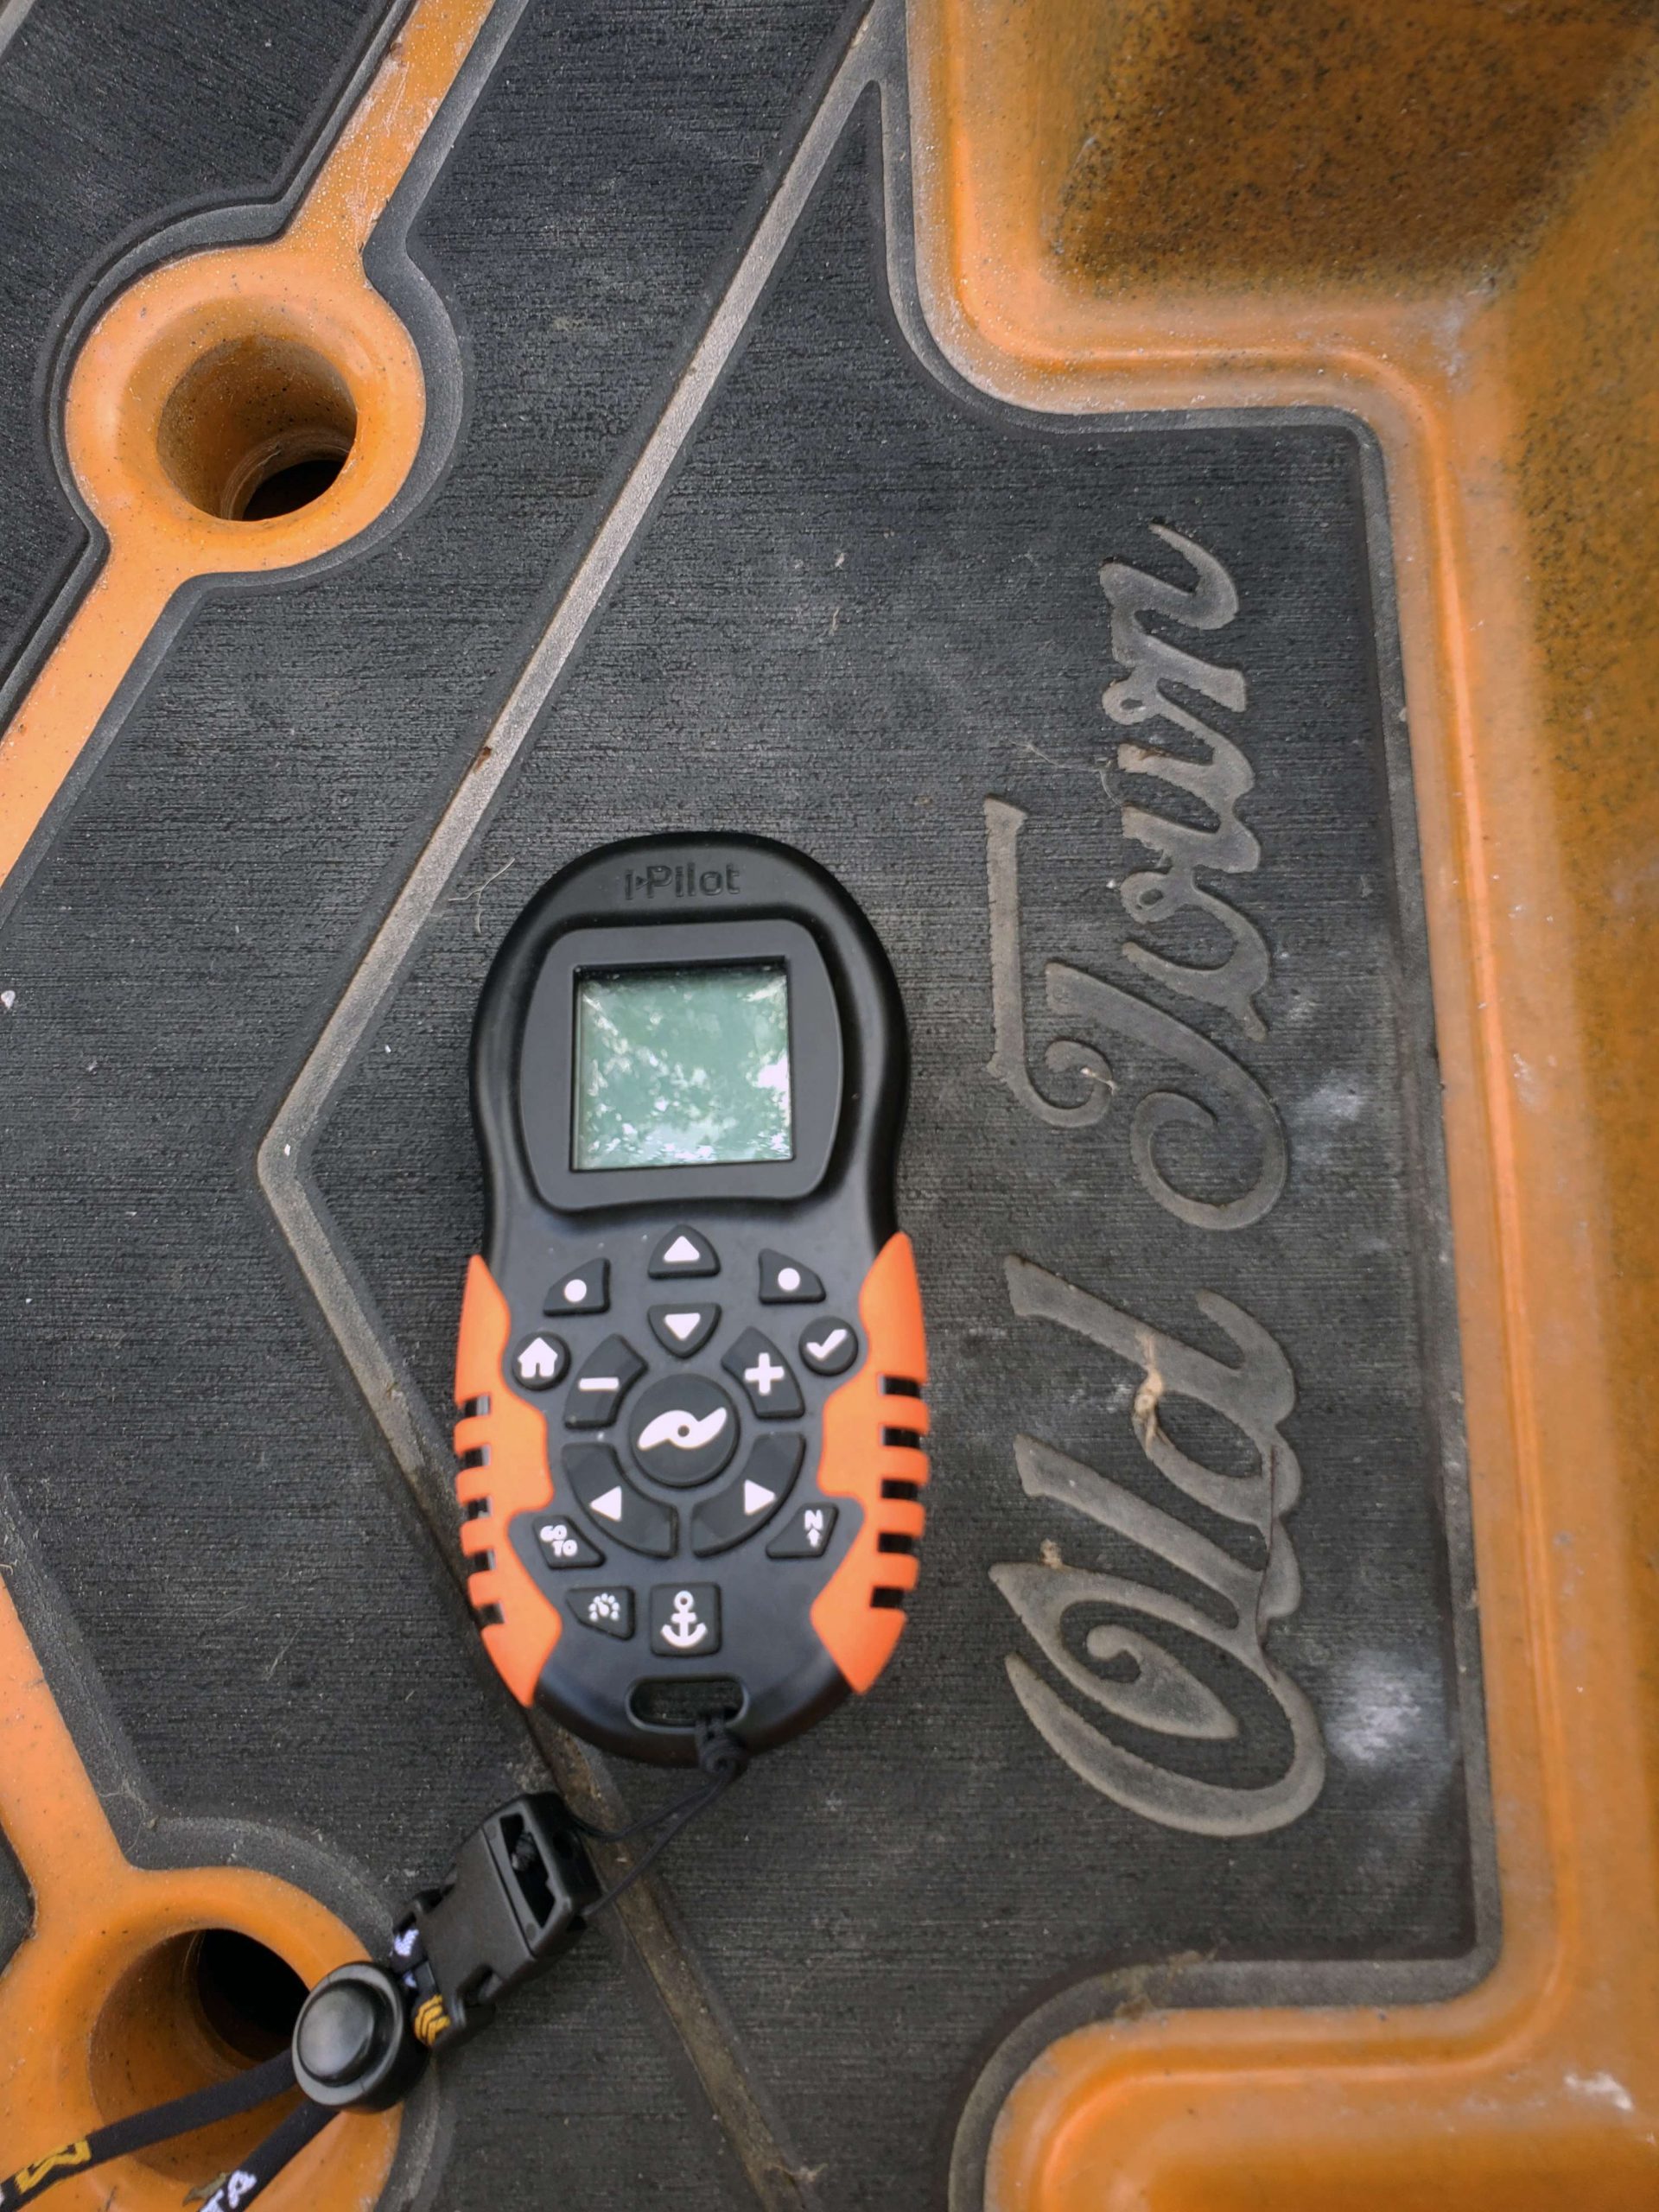 Kayak maneuvering and positioning made easy with the Bluetooth iPilot remote, which controls his kayak keeps his hands free to fish and compete.